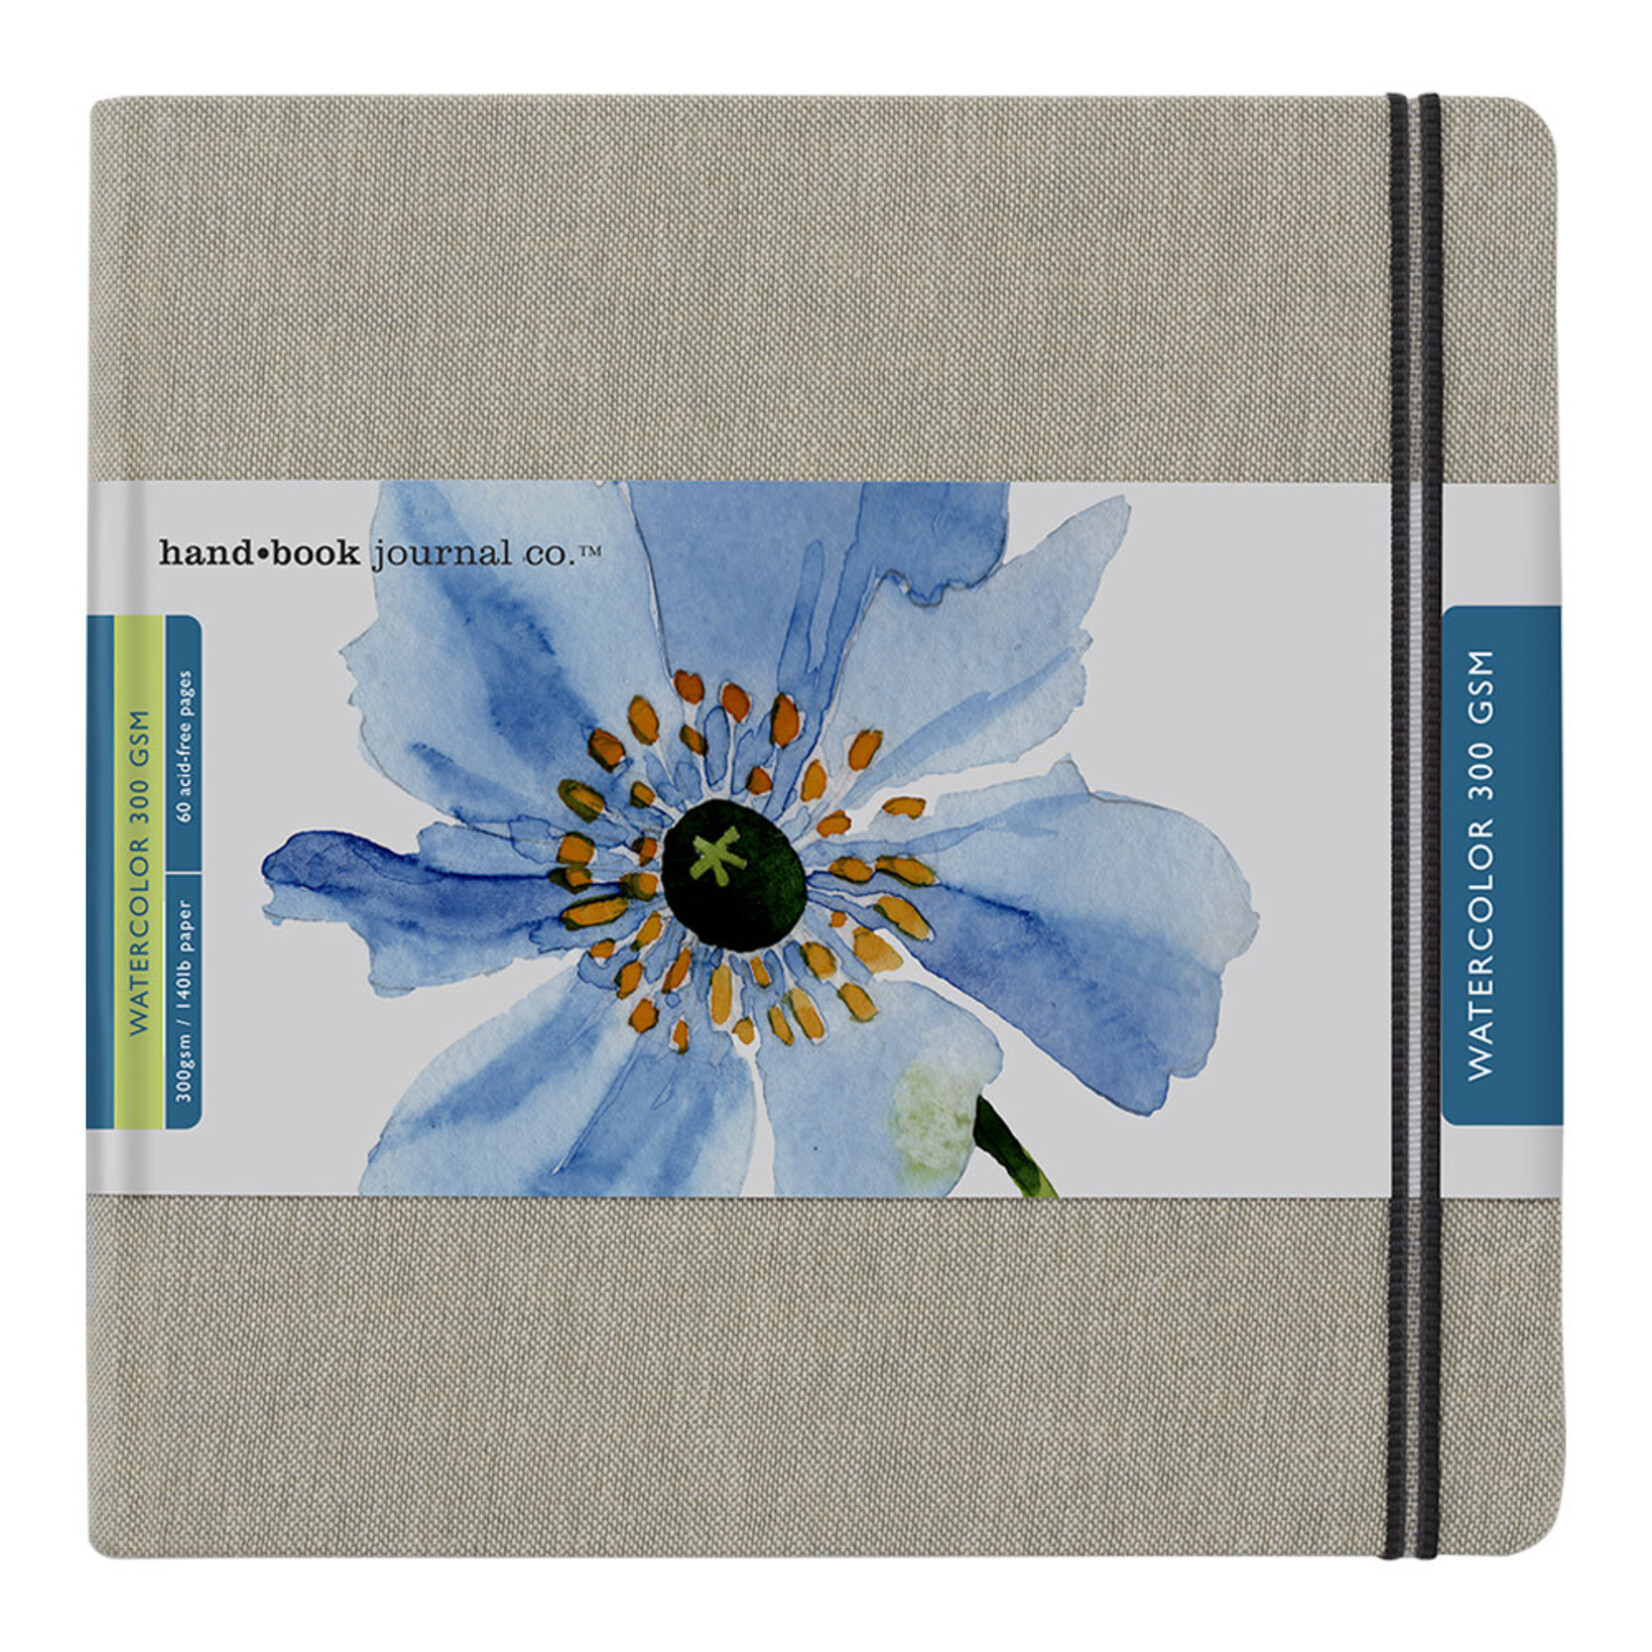 Global Hand Book Watercolor Journals, 300 gsm, 8.25" x 8.25" - Square